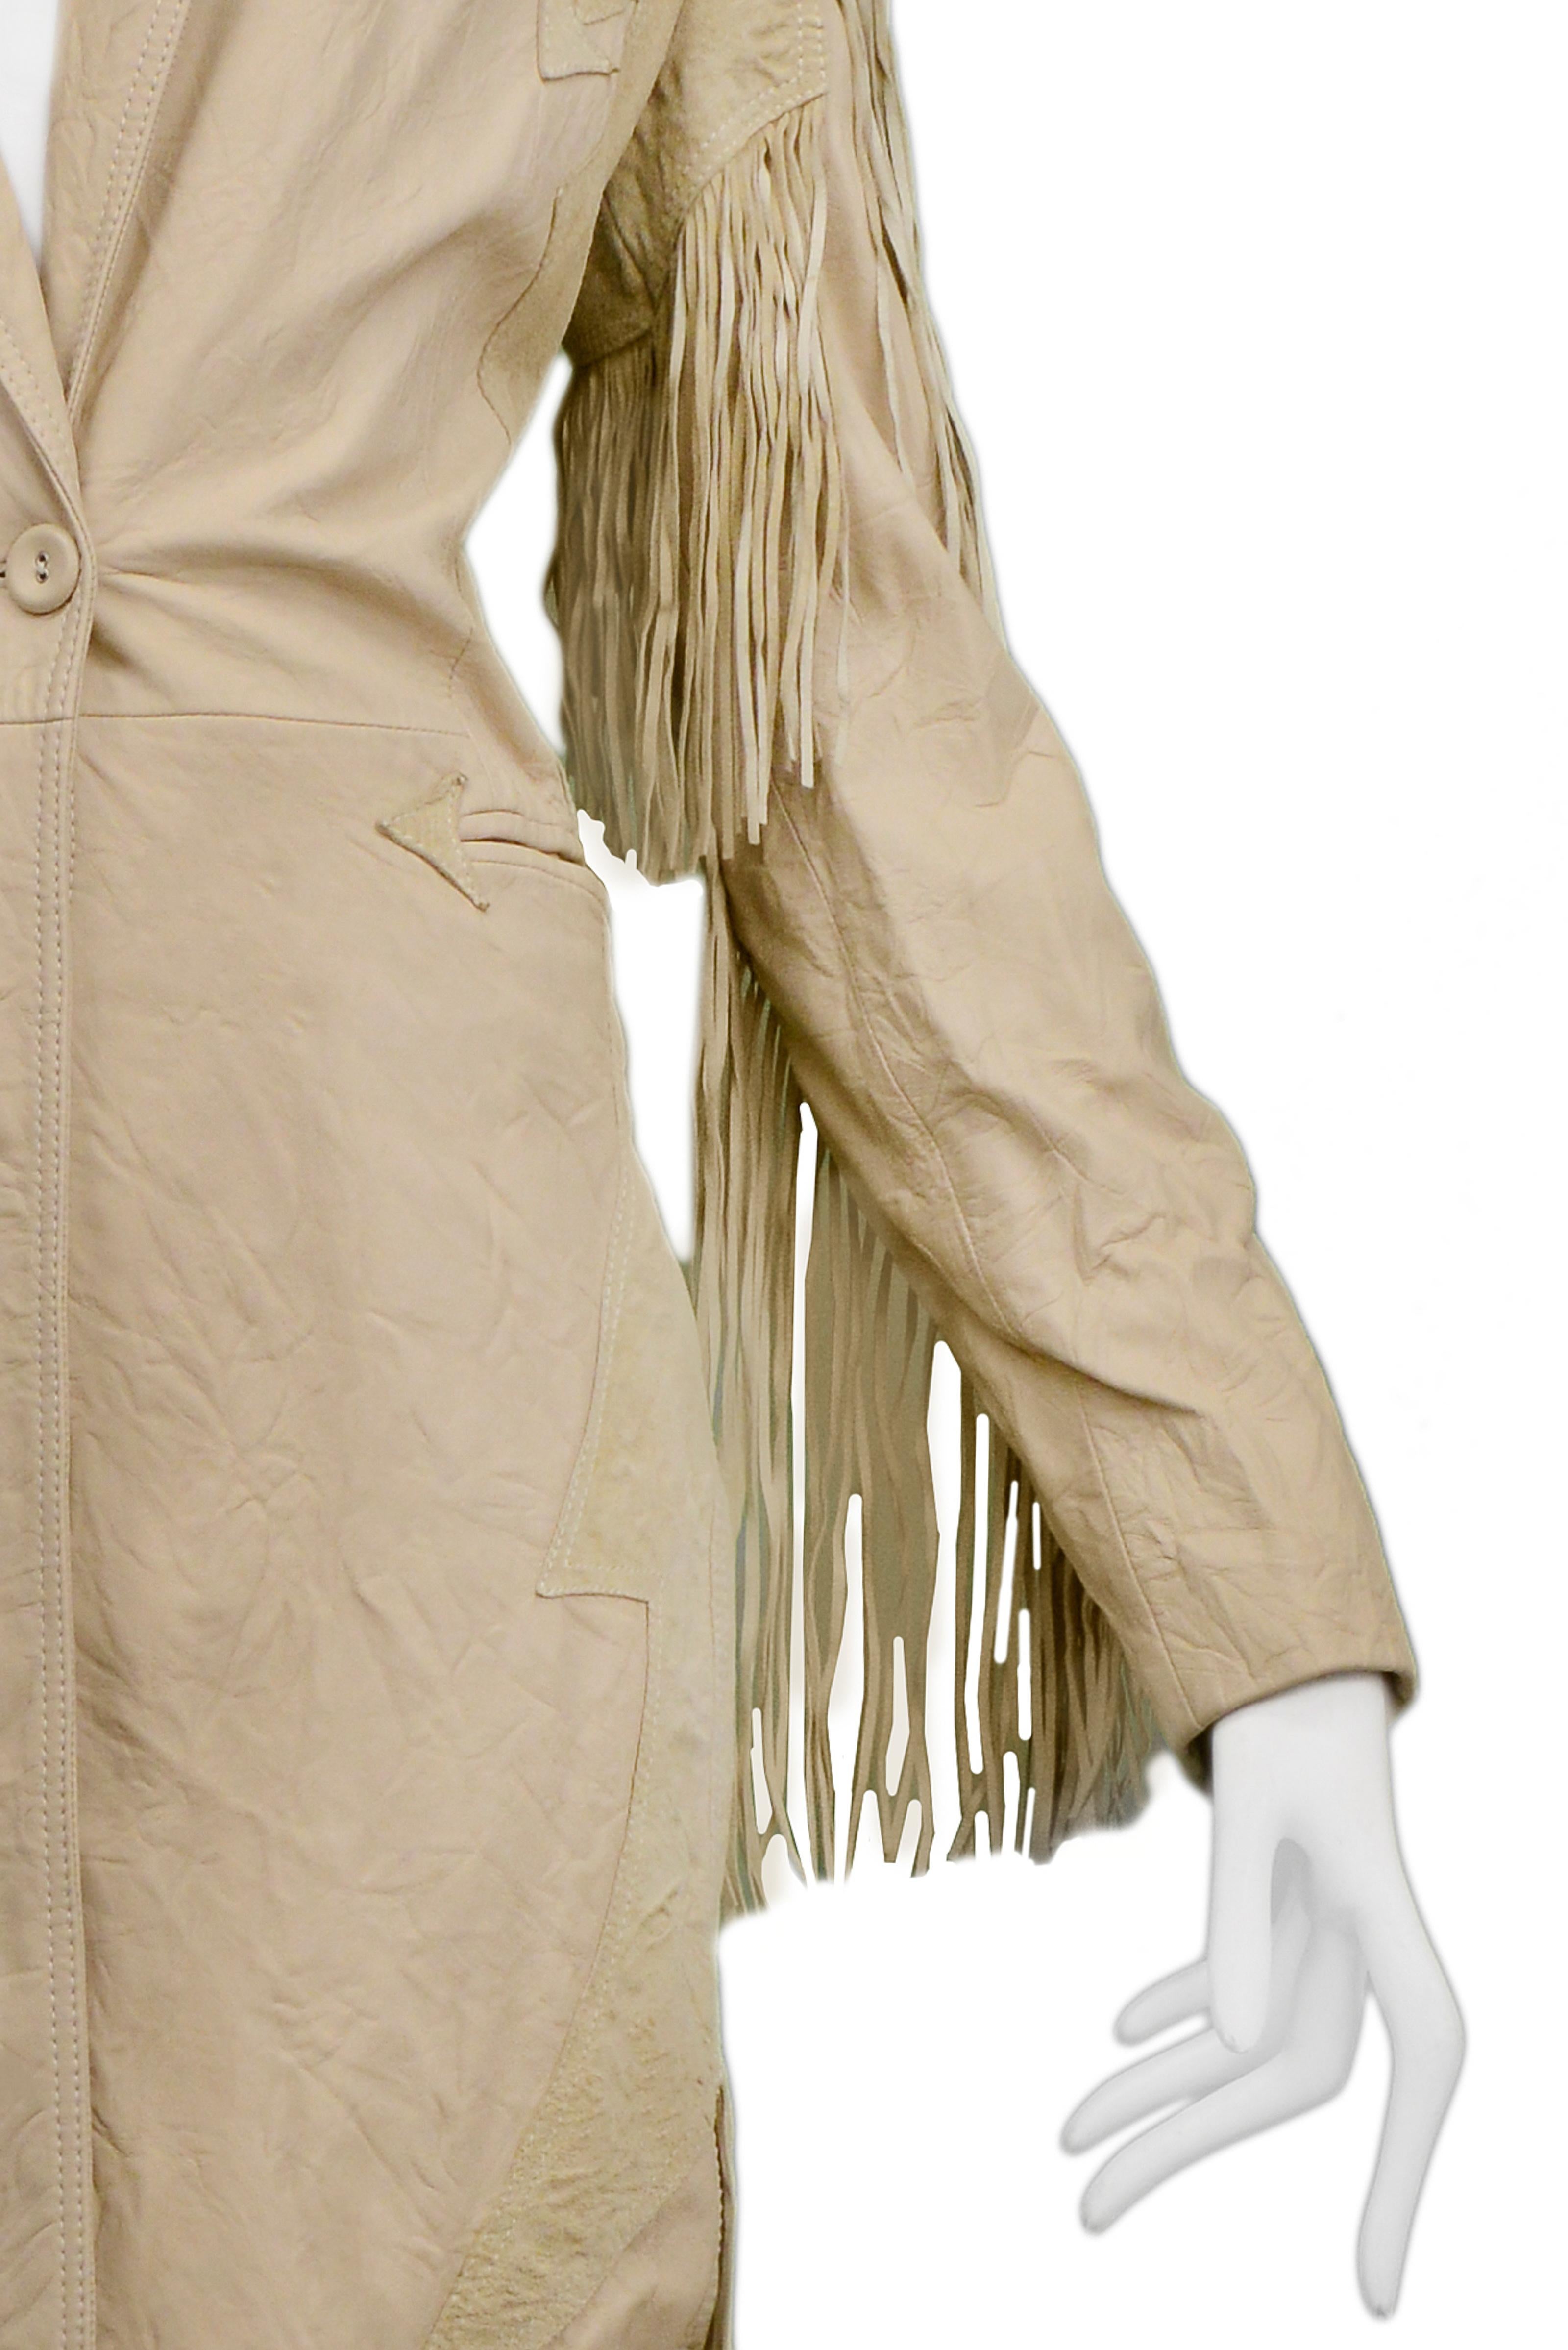 Vintage Versace Tan Leather Western Trench with Fringe Runway 2003 For Sale 1